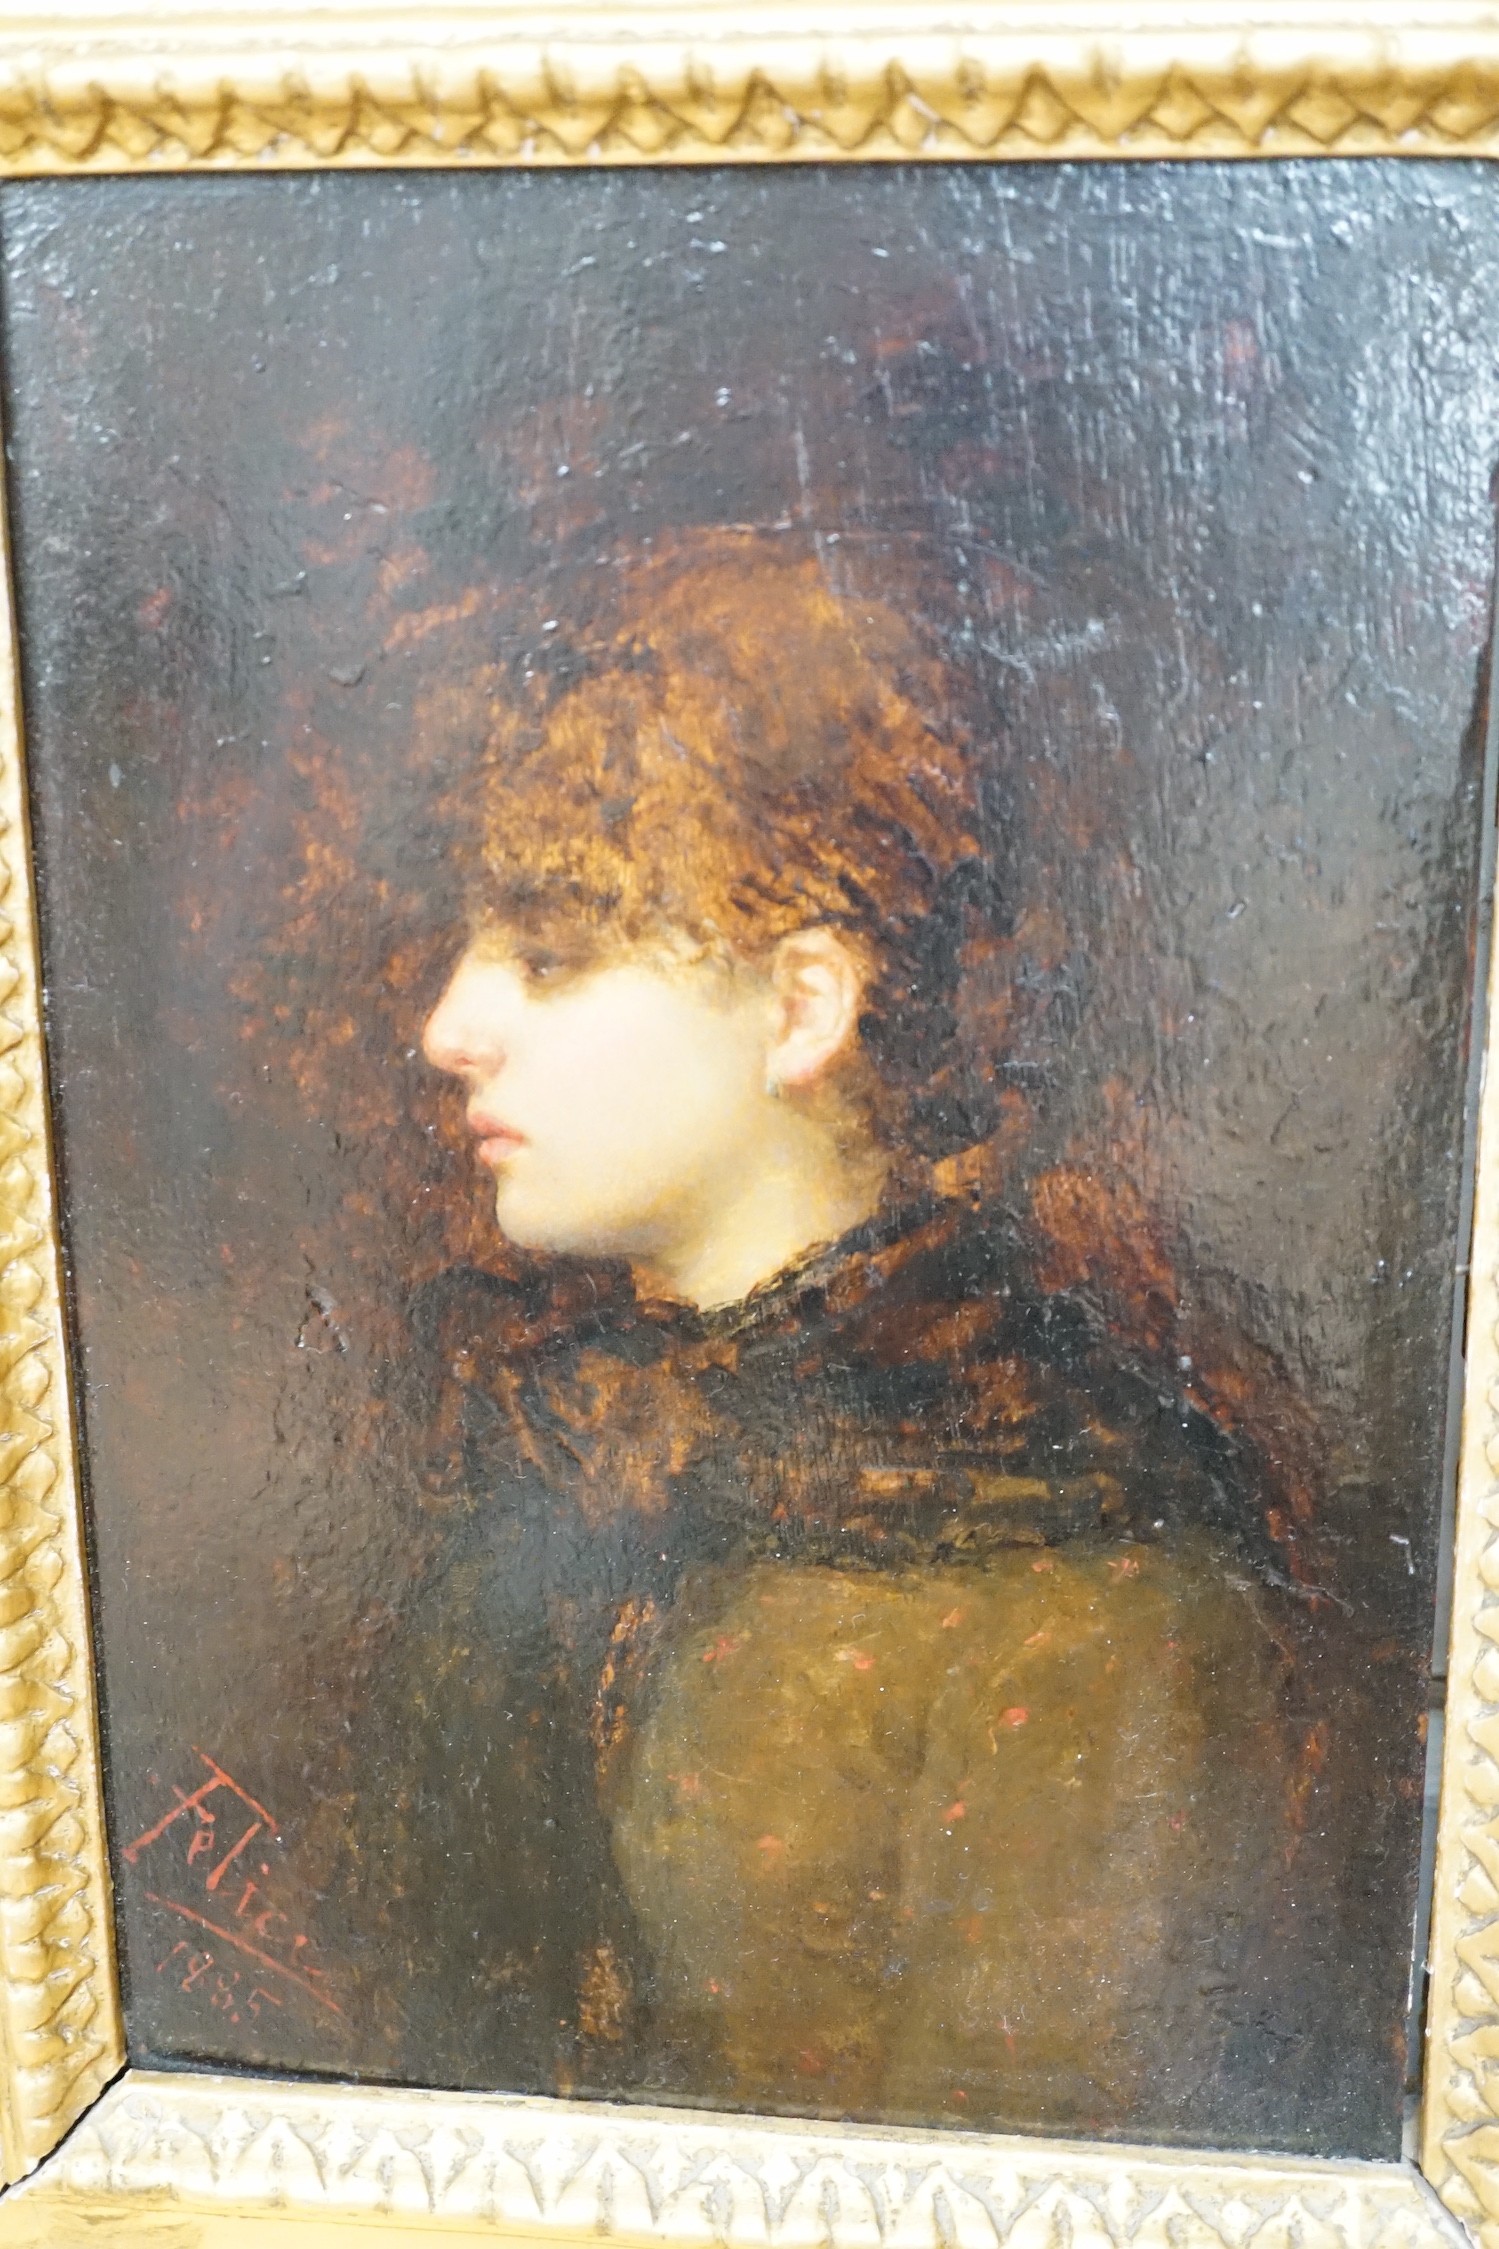 Felice, oil on panel, Portrait of a lady, signed and dated 1885, 32 x 23cm